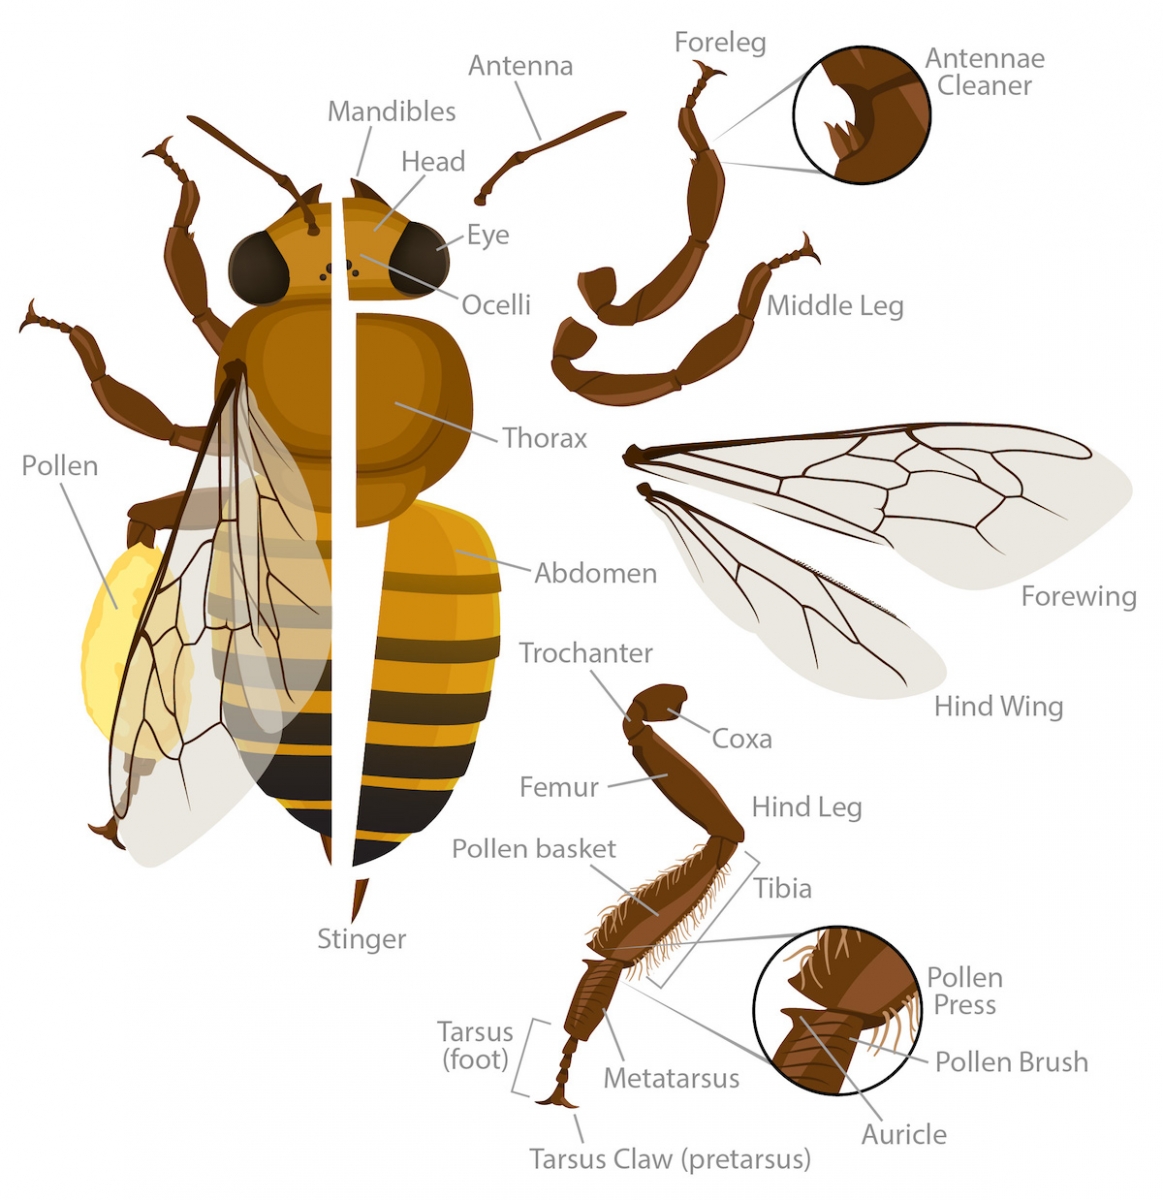 What is the fourth leg of a bee called?